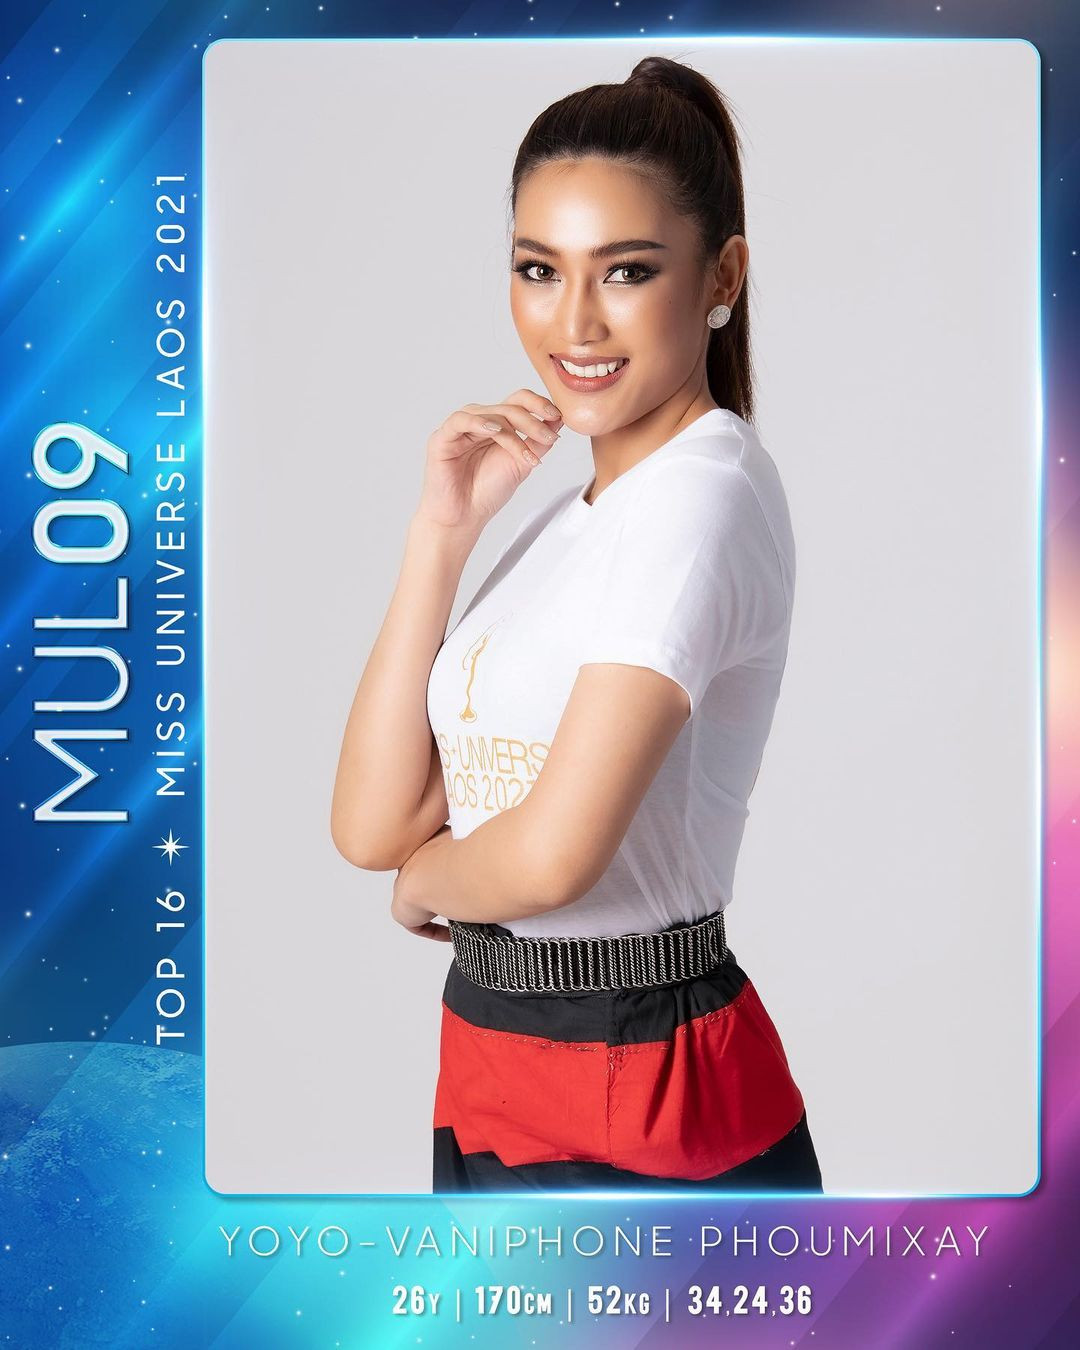 candidatas a miss universe laos 2021. final: 31 oct. 5ANX4f